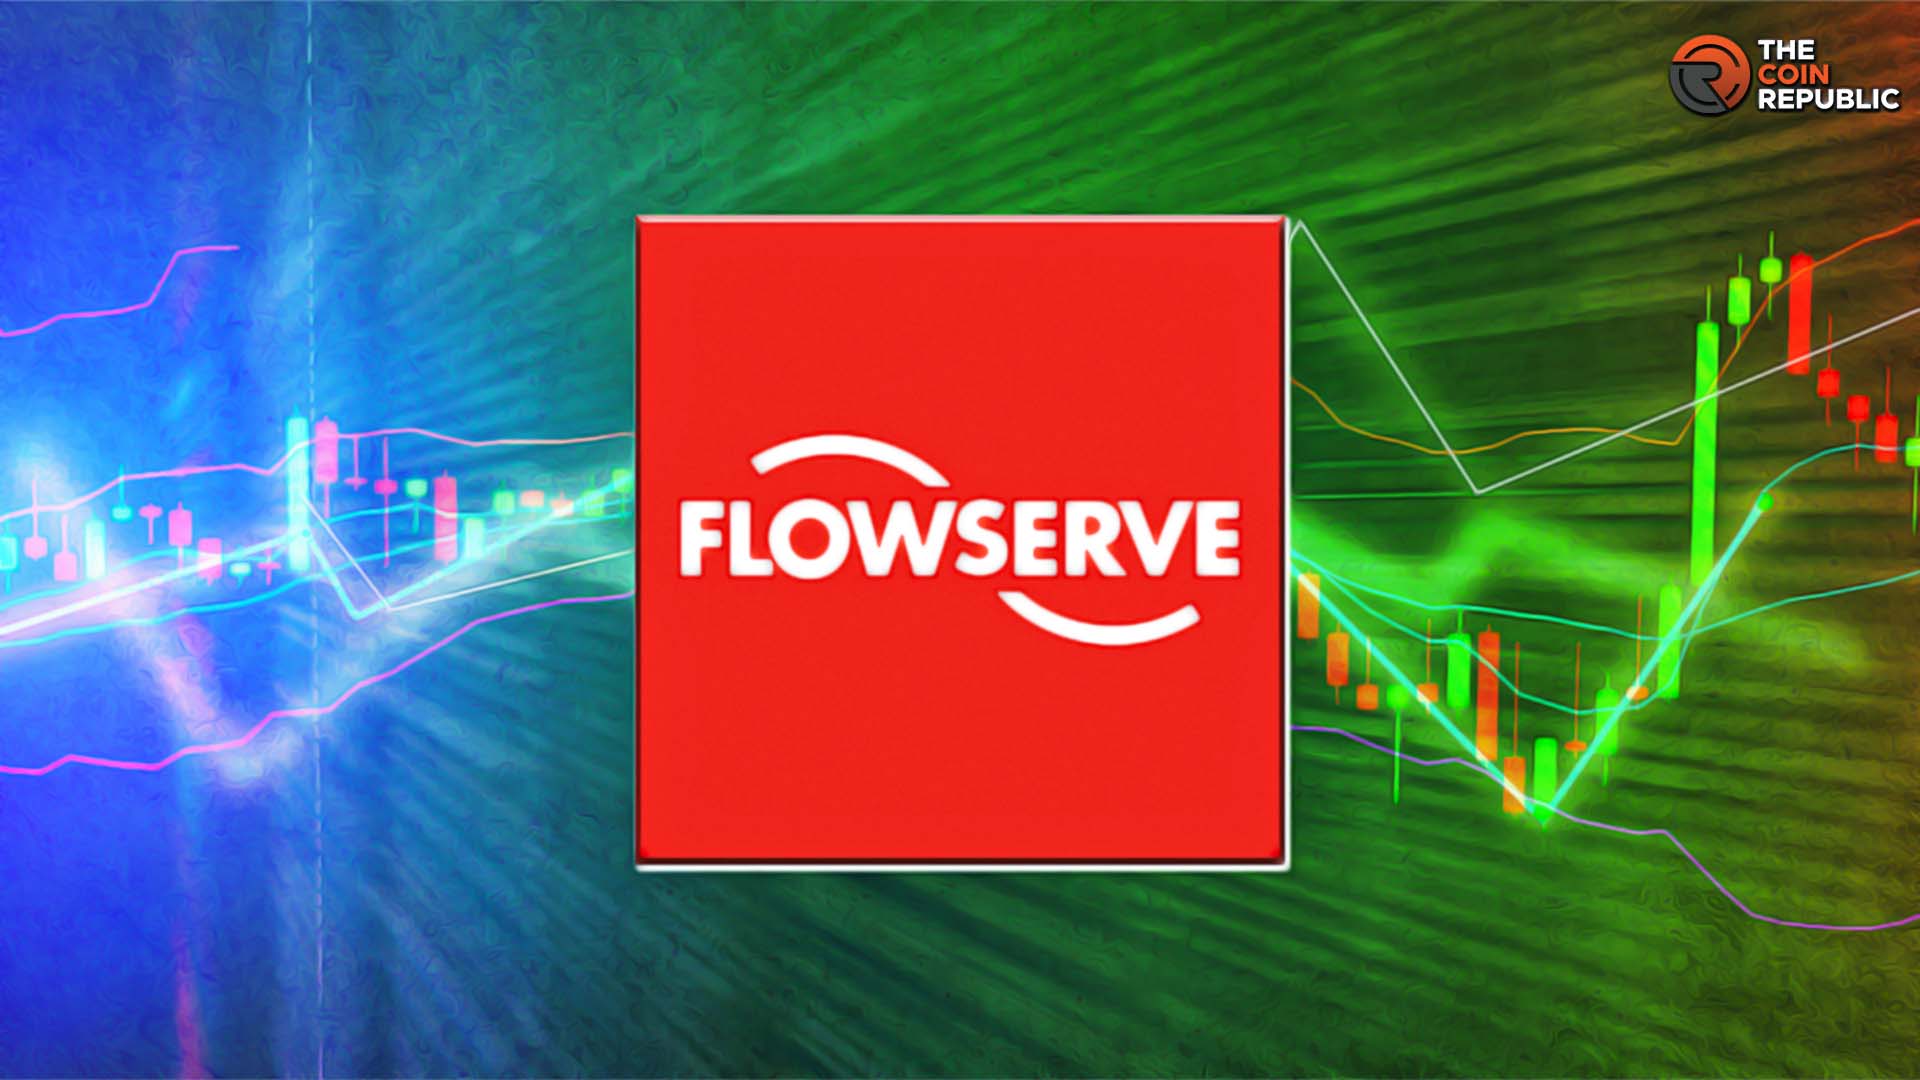 Flowserve (FLS Stock) Price Continues to Gain; Targeting $50